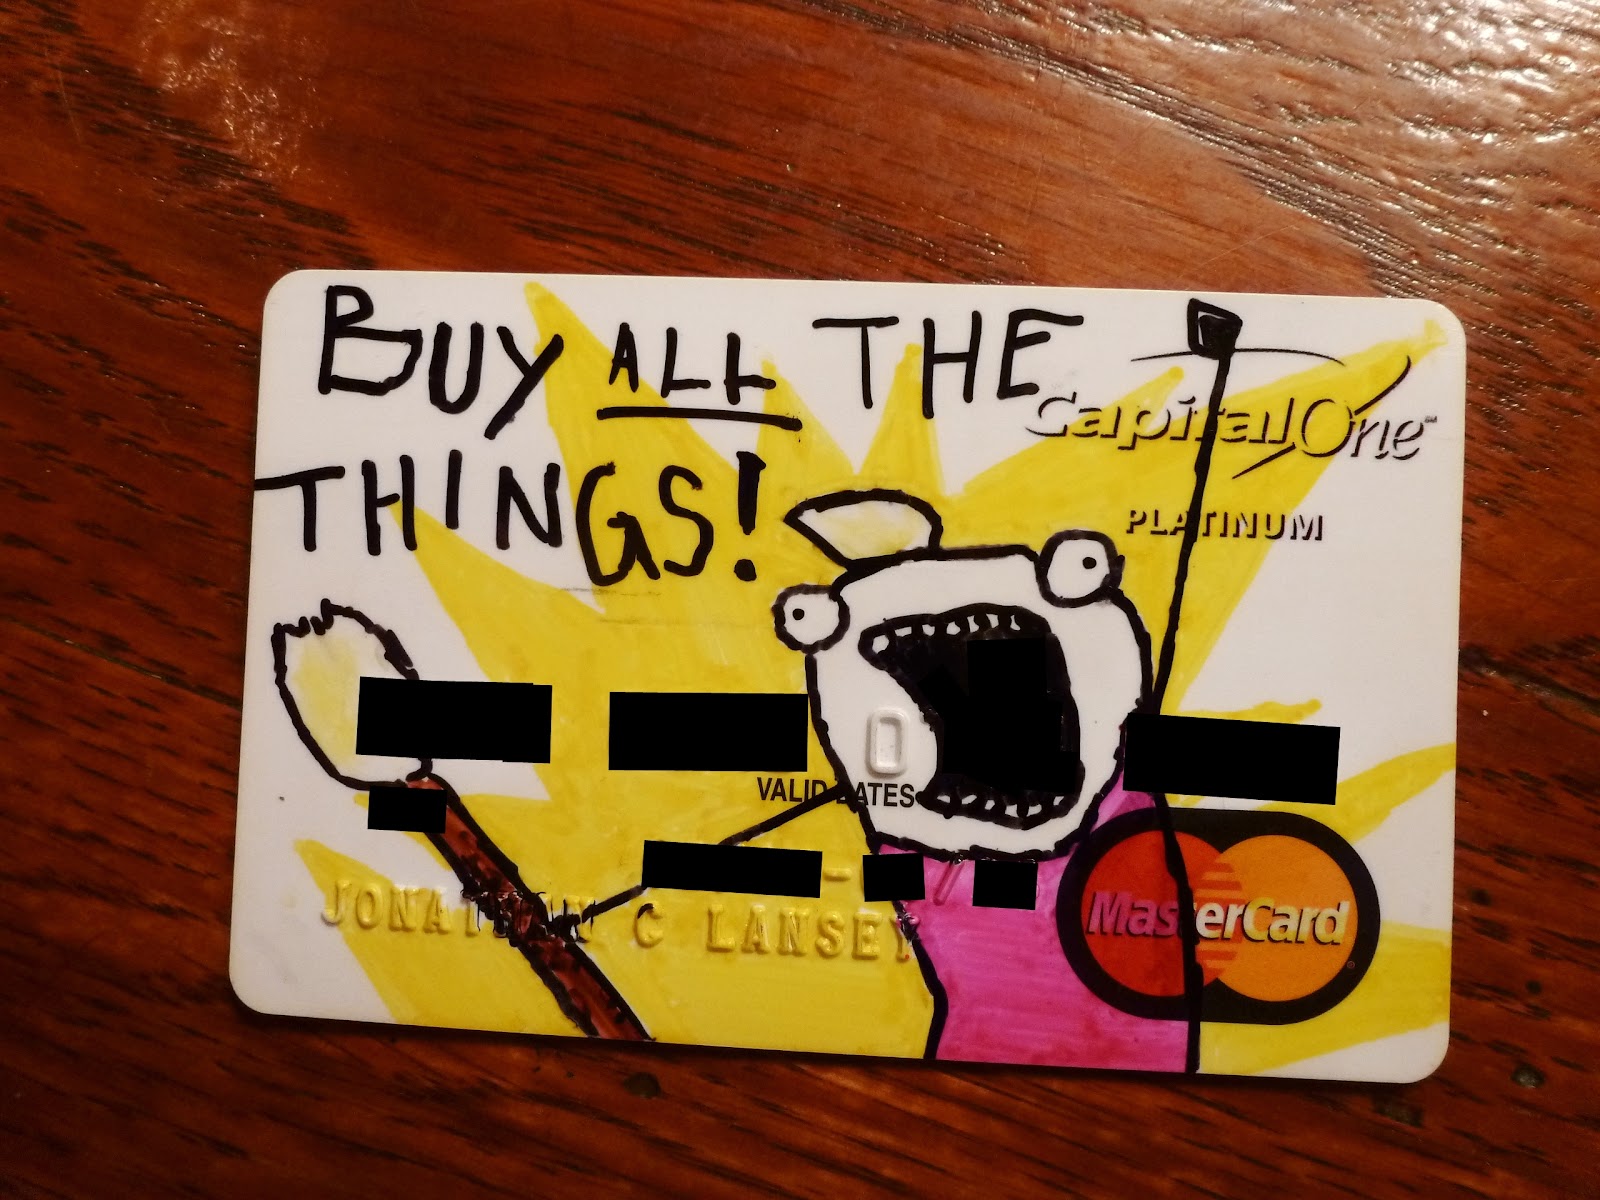 The Lansey Brothers' Blog: Buy all the things Credit Card Design